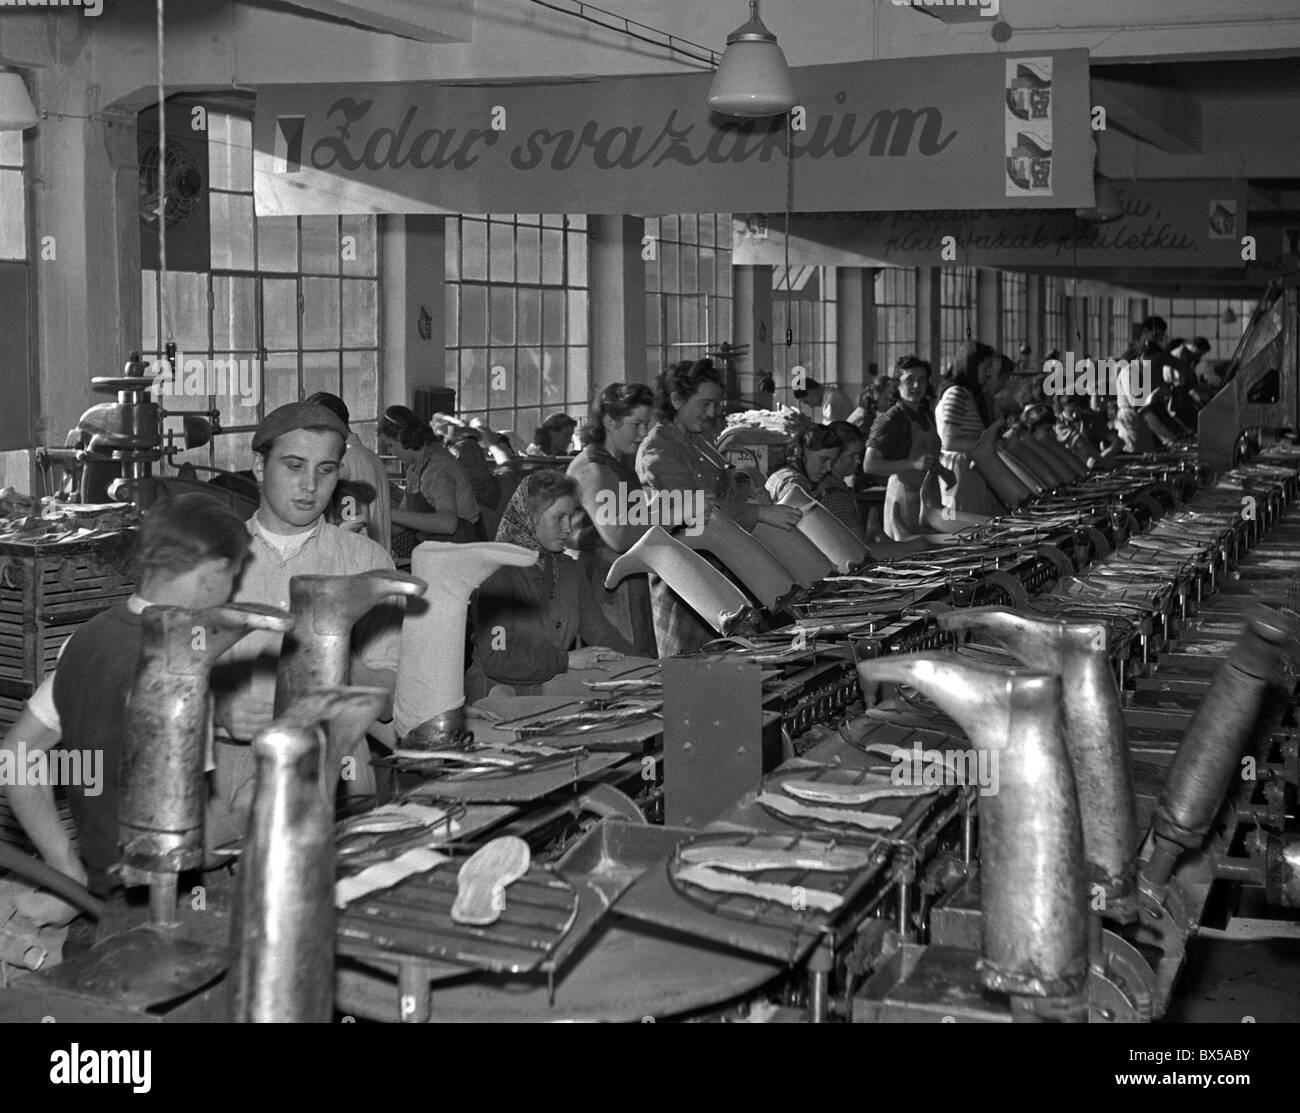 Czechoslovakia - Gottwaldov 1950. Shoe factory workers employed by Svit shoe making factory. This plant was formely owned by Stock Photo